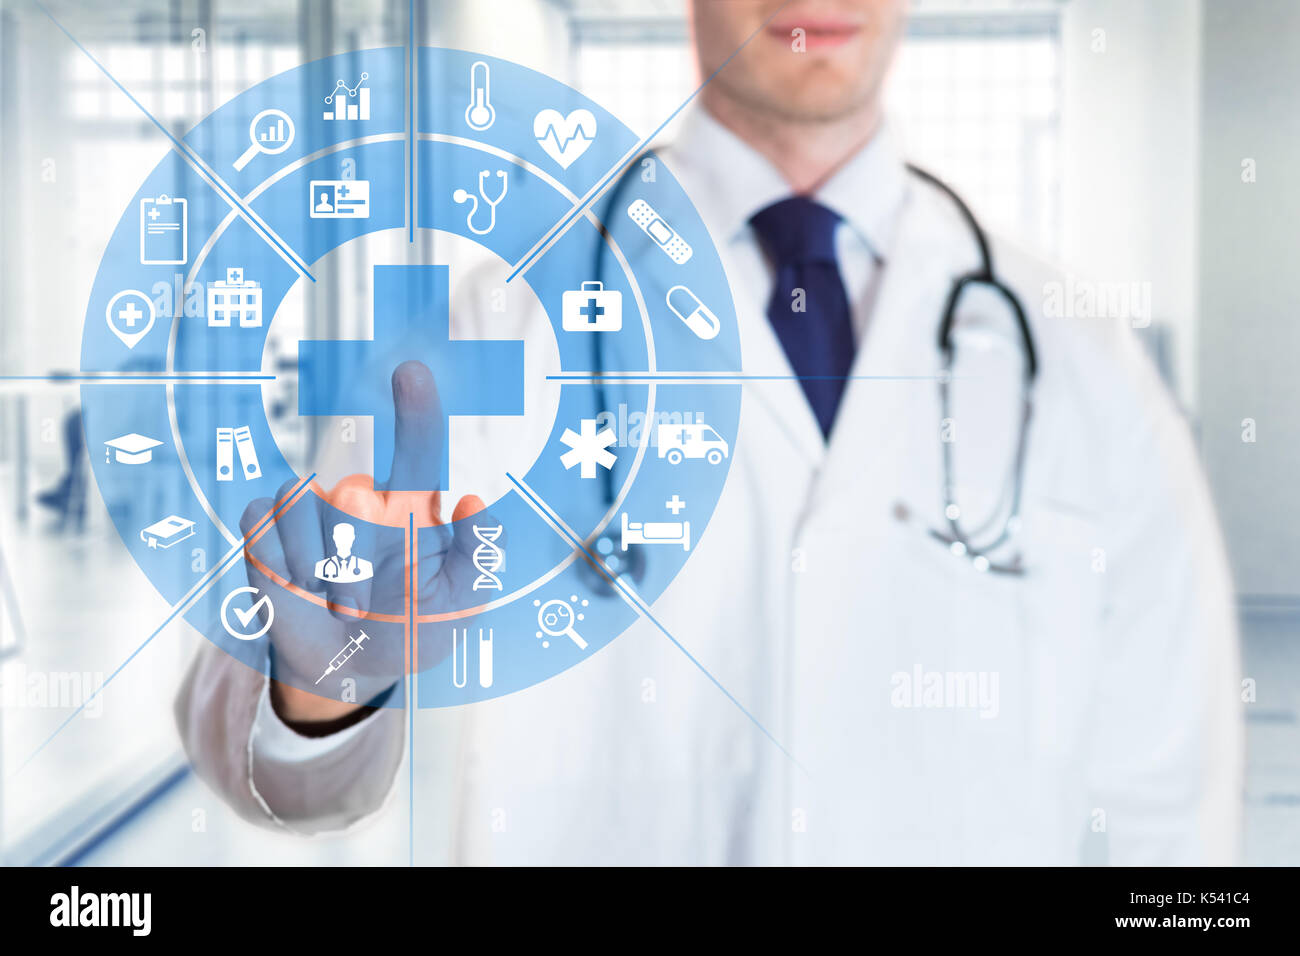 Medical doctor touching AR futuristic computer interface with concept about health care services, hospital background Stock Photo